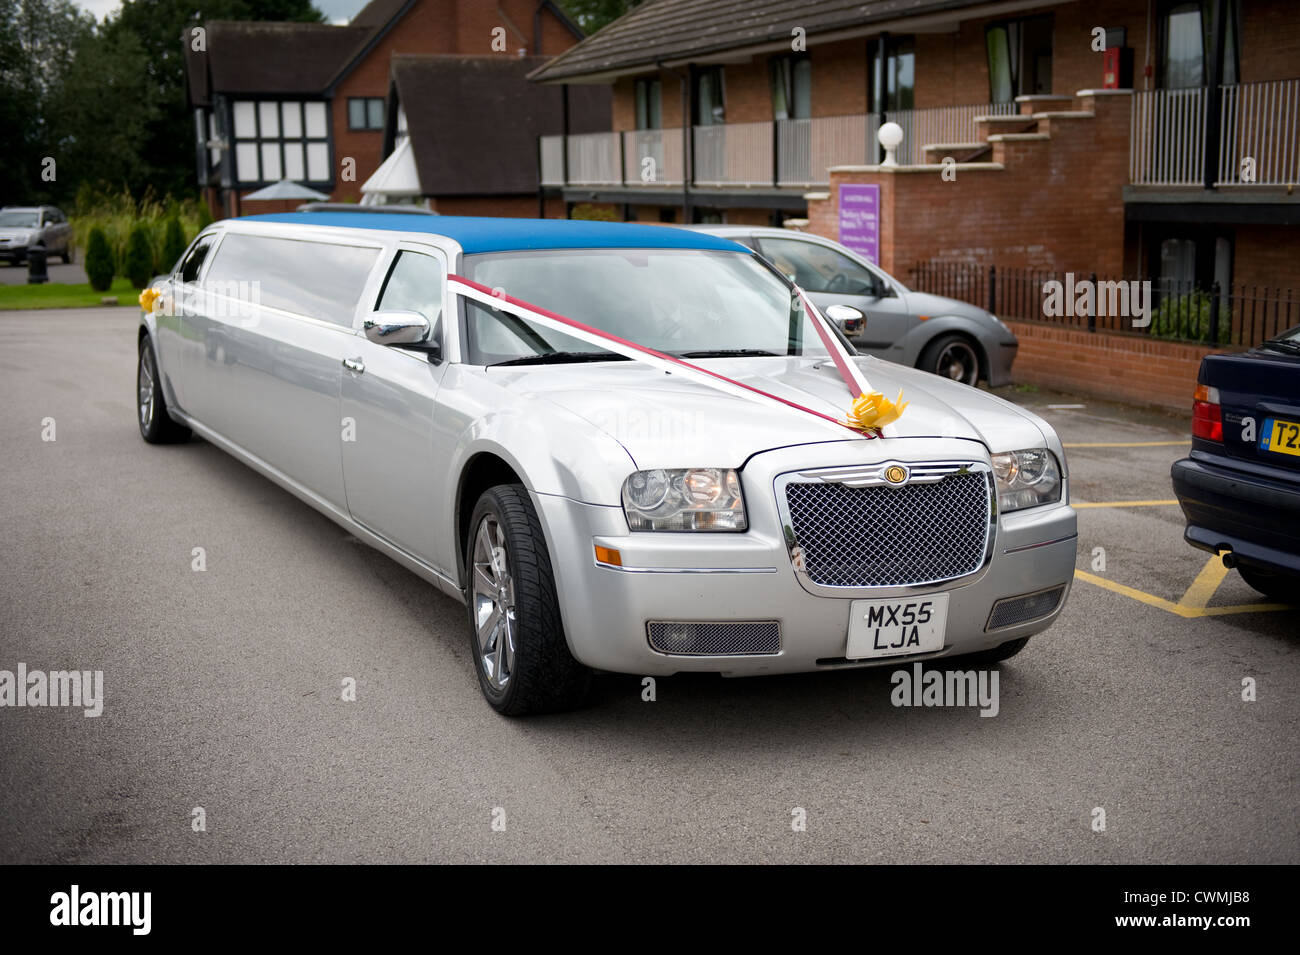 a silver stretch limousine wedding car made by Chrysler Stock Photo